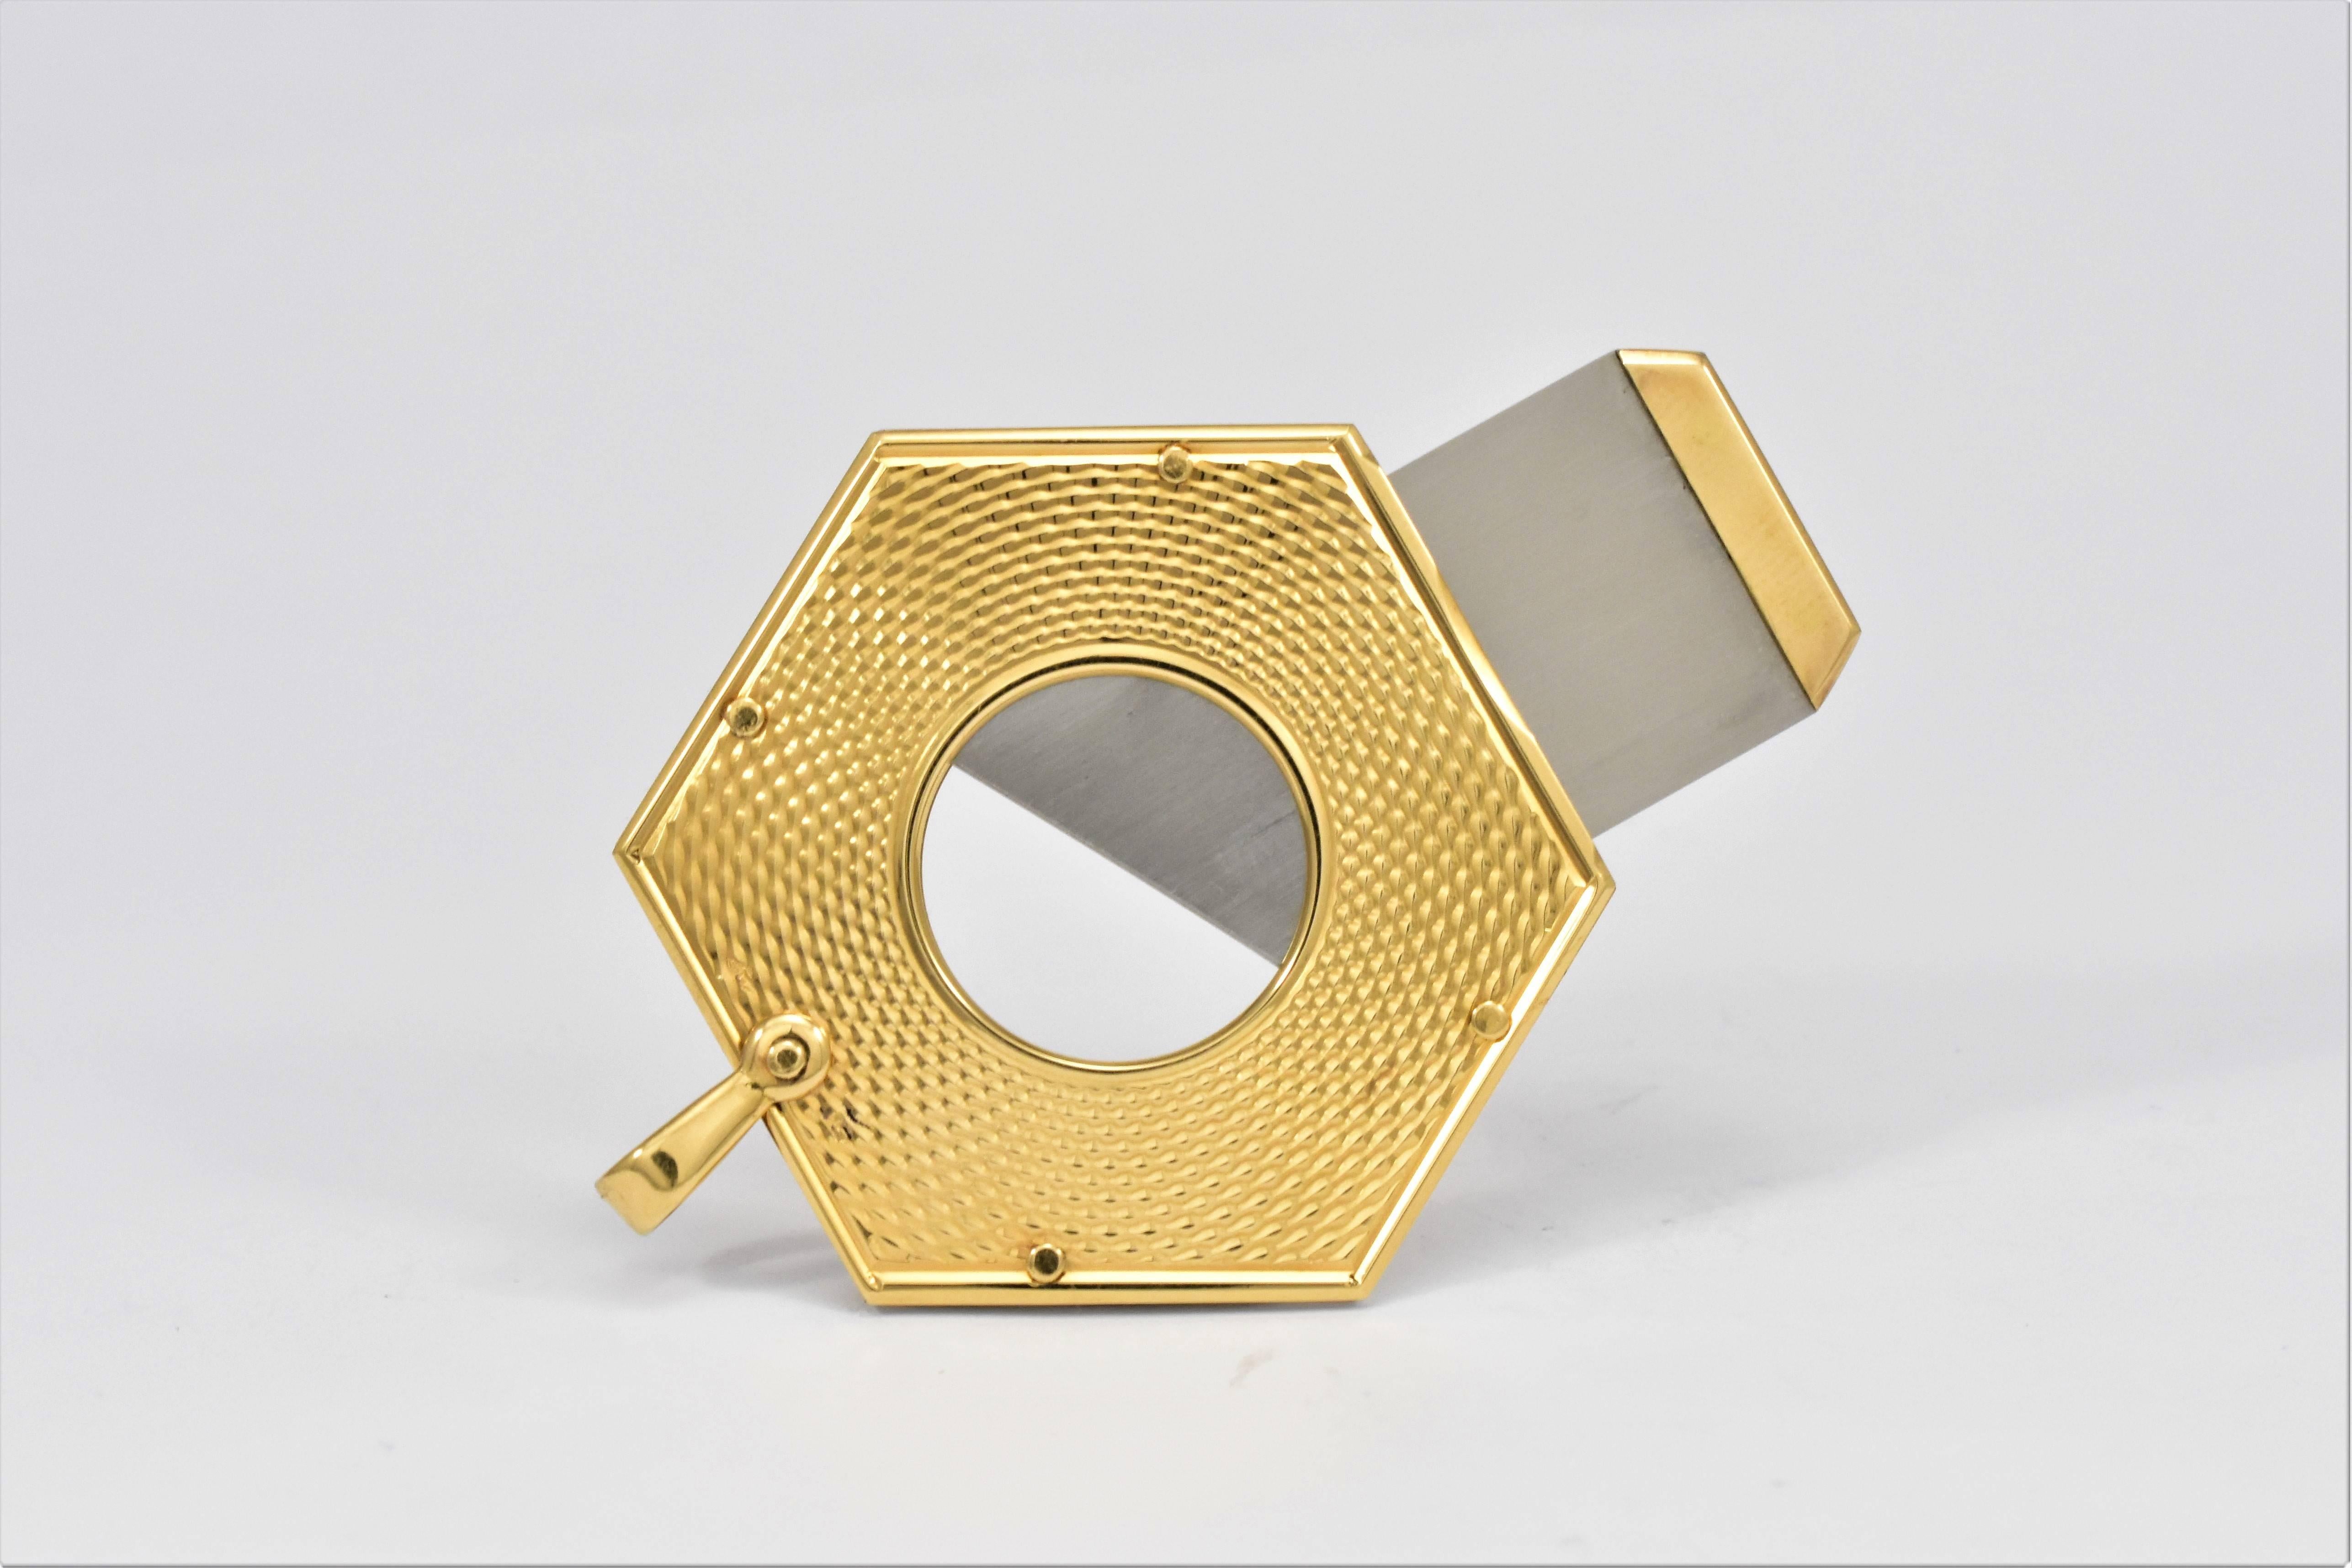 An Eloi Hexagon shaped golden cigar cutter with a detailed radiating pattern in the polished finish. No UK Hallmark as originated in France, however tested as 18-karat gold with a stainless steel inside for blade etc. French hallmark. Unused and